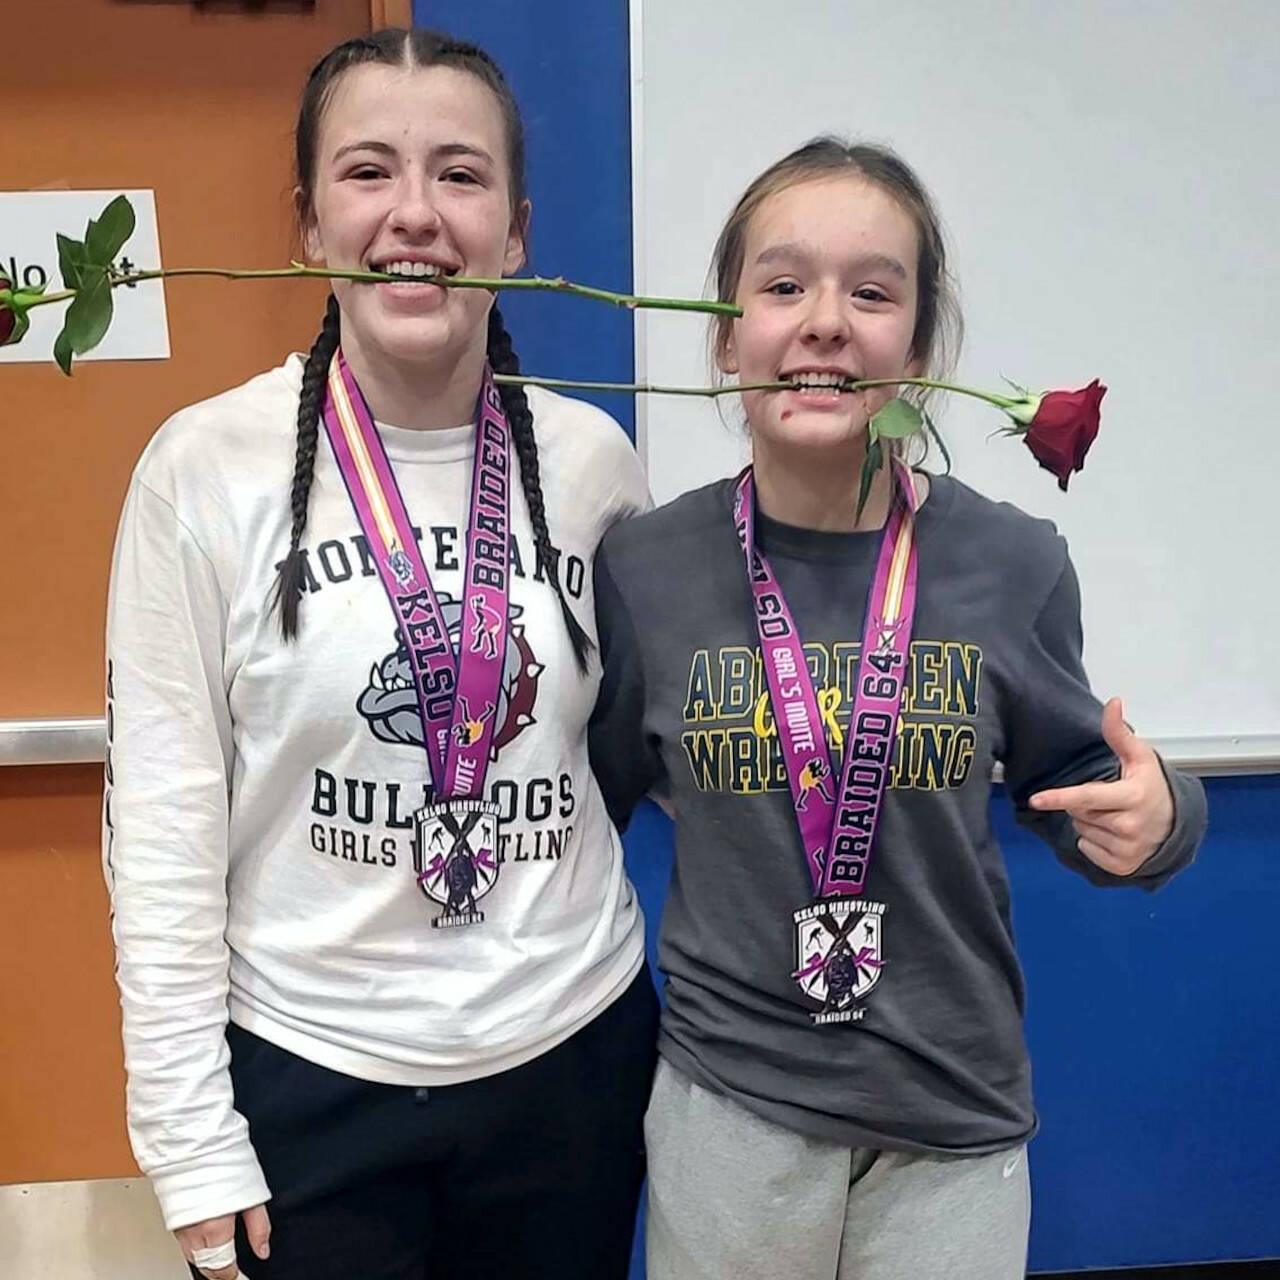 PHOTO BY TAMARA YAKOVICH Montesano’s Kya Roundtree, left, and Aberdeen’s Felicia Bell pose for a photo after placing on the podium of their respective weight classes on Saturday at the Braided 64 meet in Kelso.